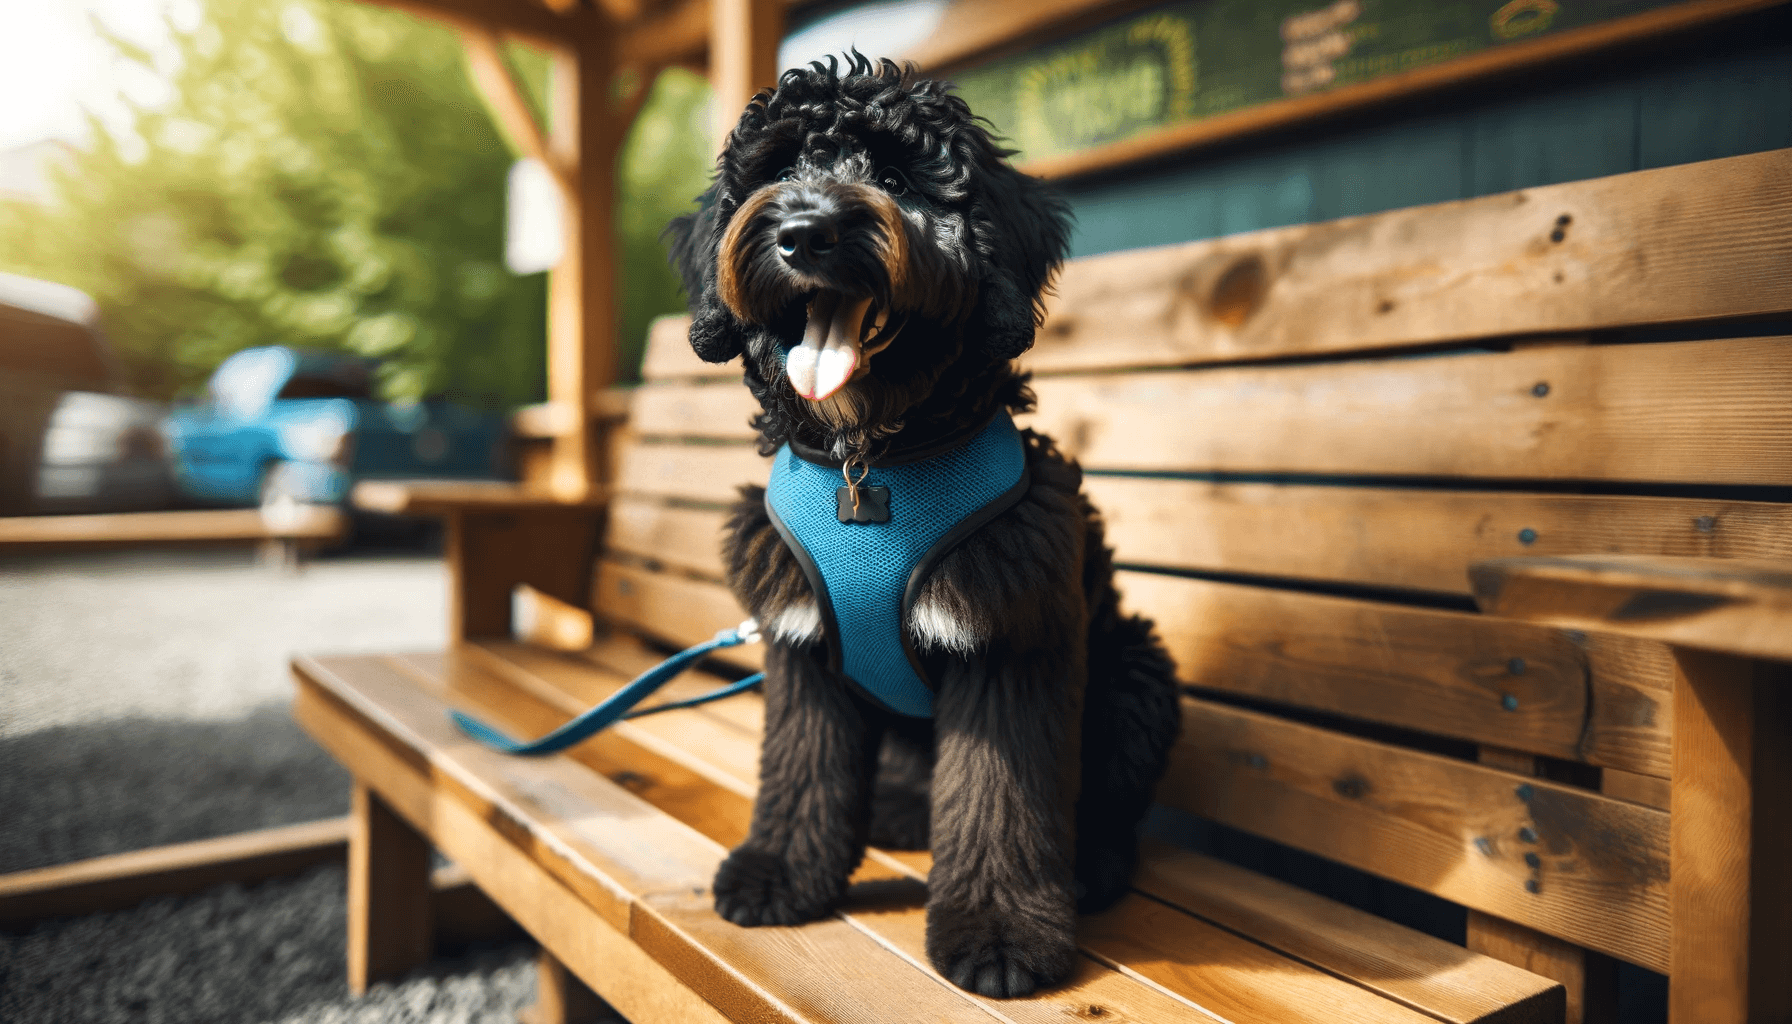 Black Aussiedoodle with a shiny black coat seated on a wooden bench wearing a blue harness